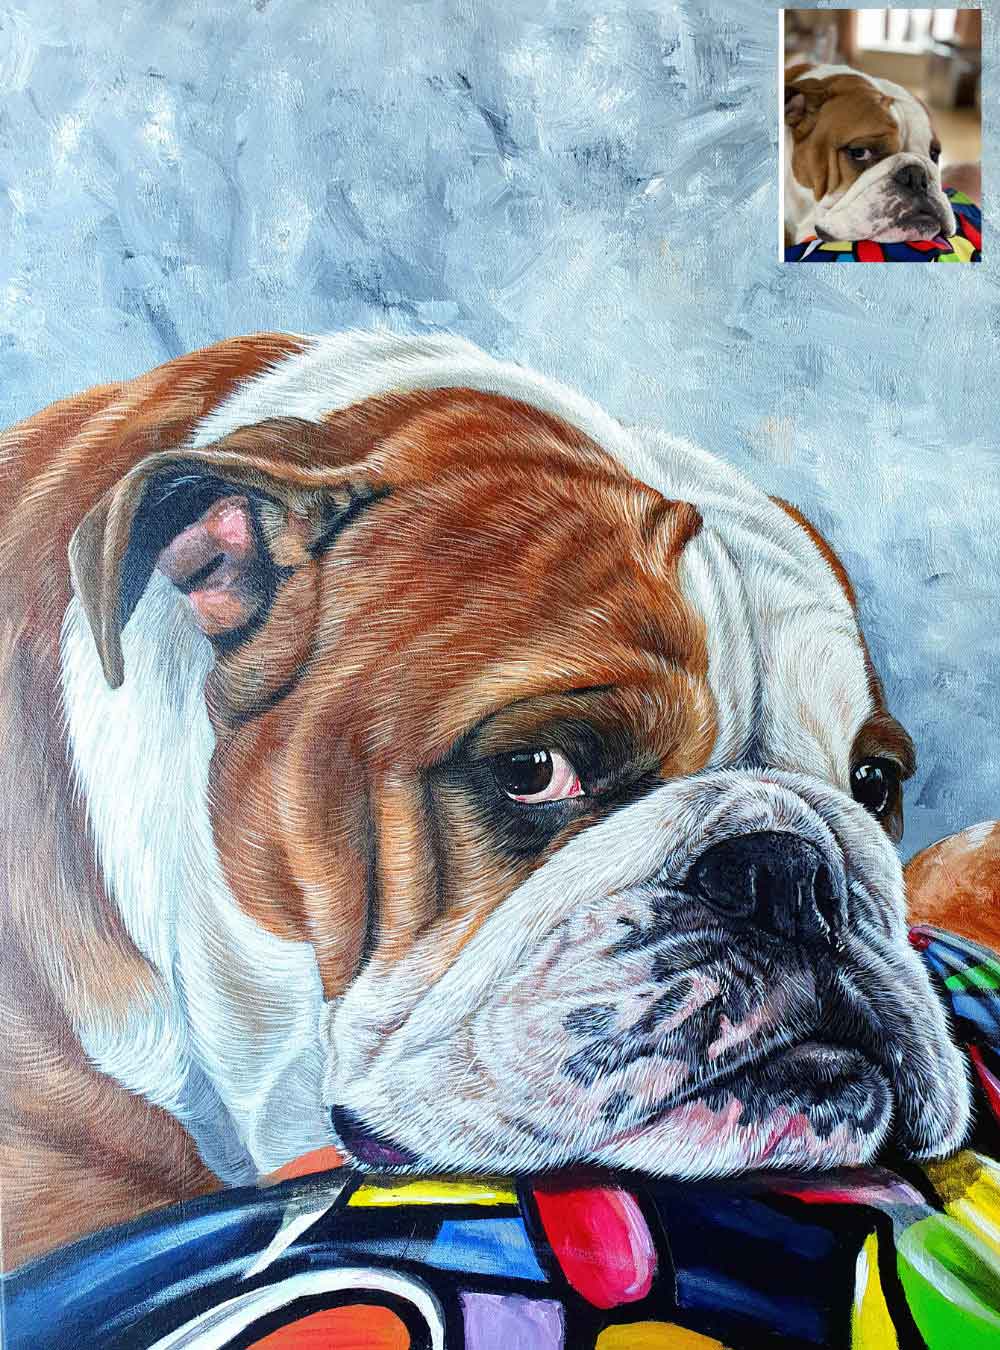 Featured image for “A Bulldog Portrait on Canvas”